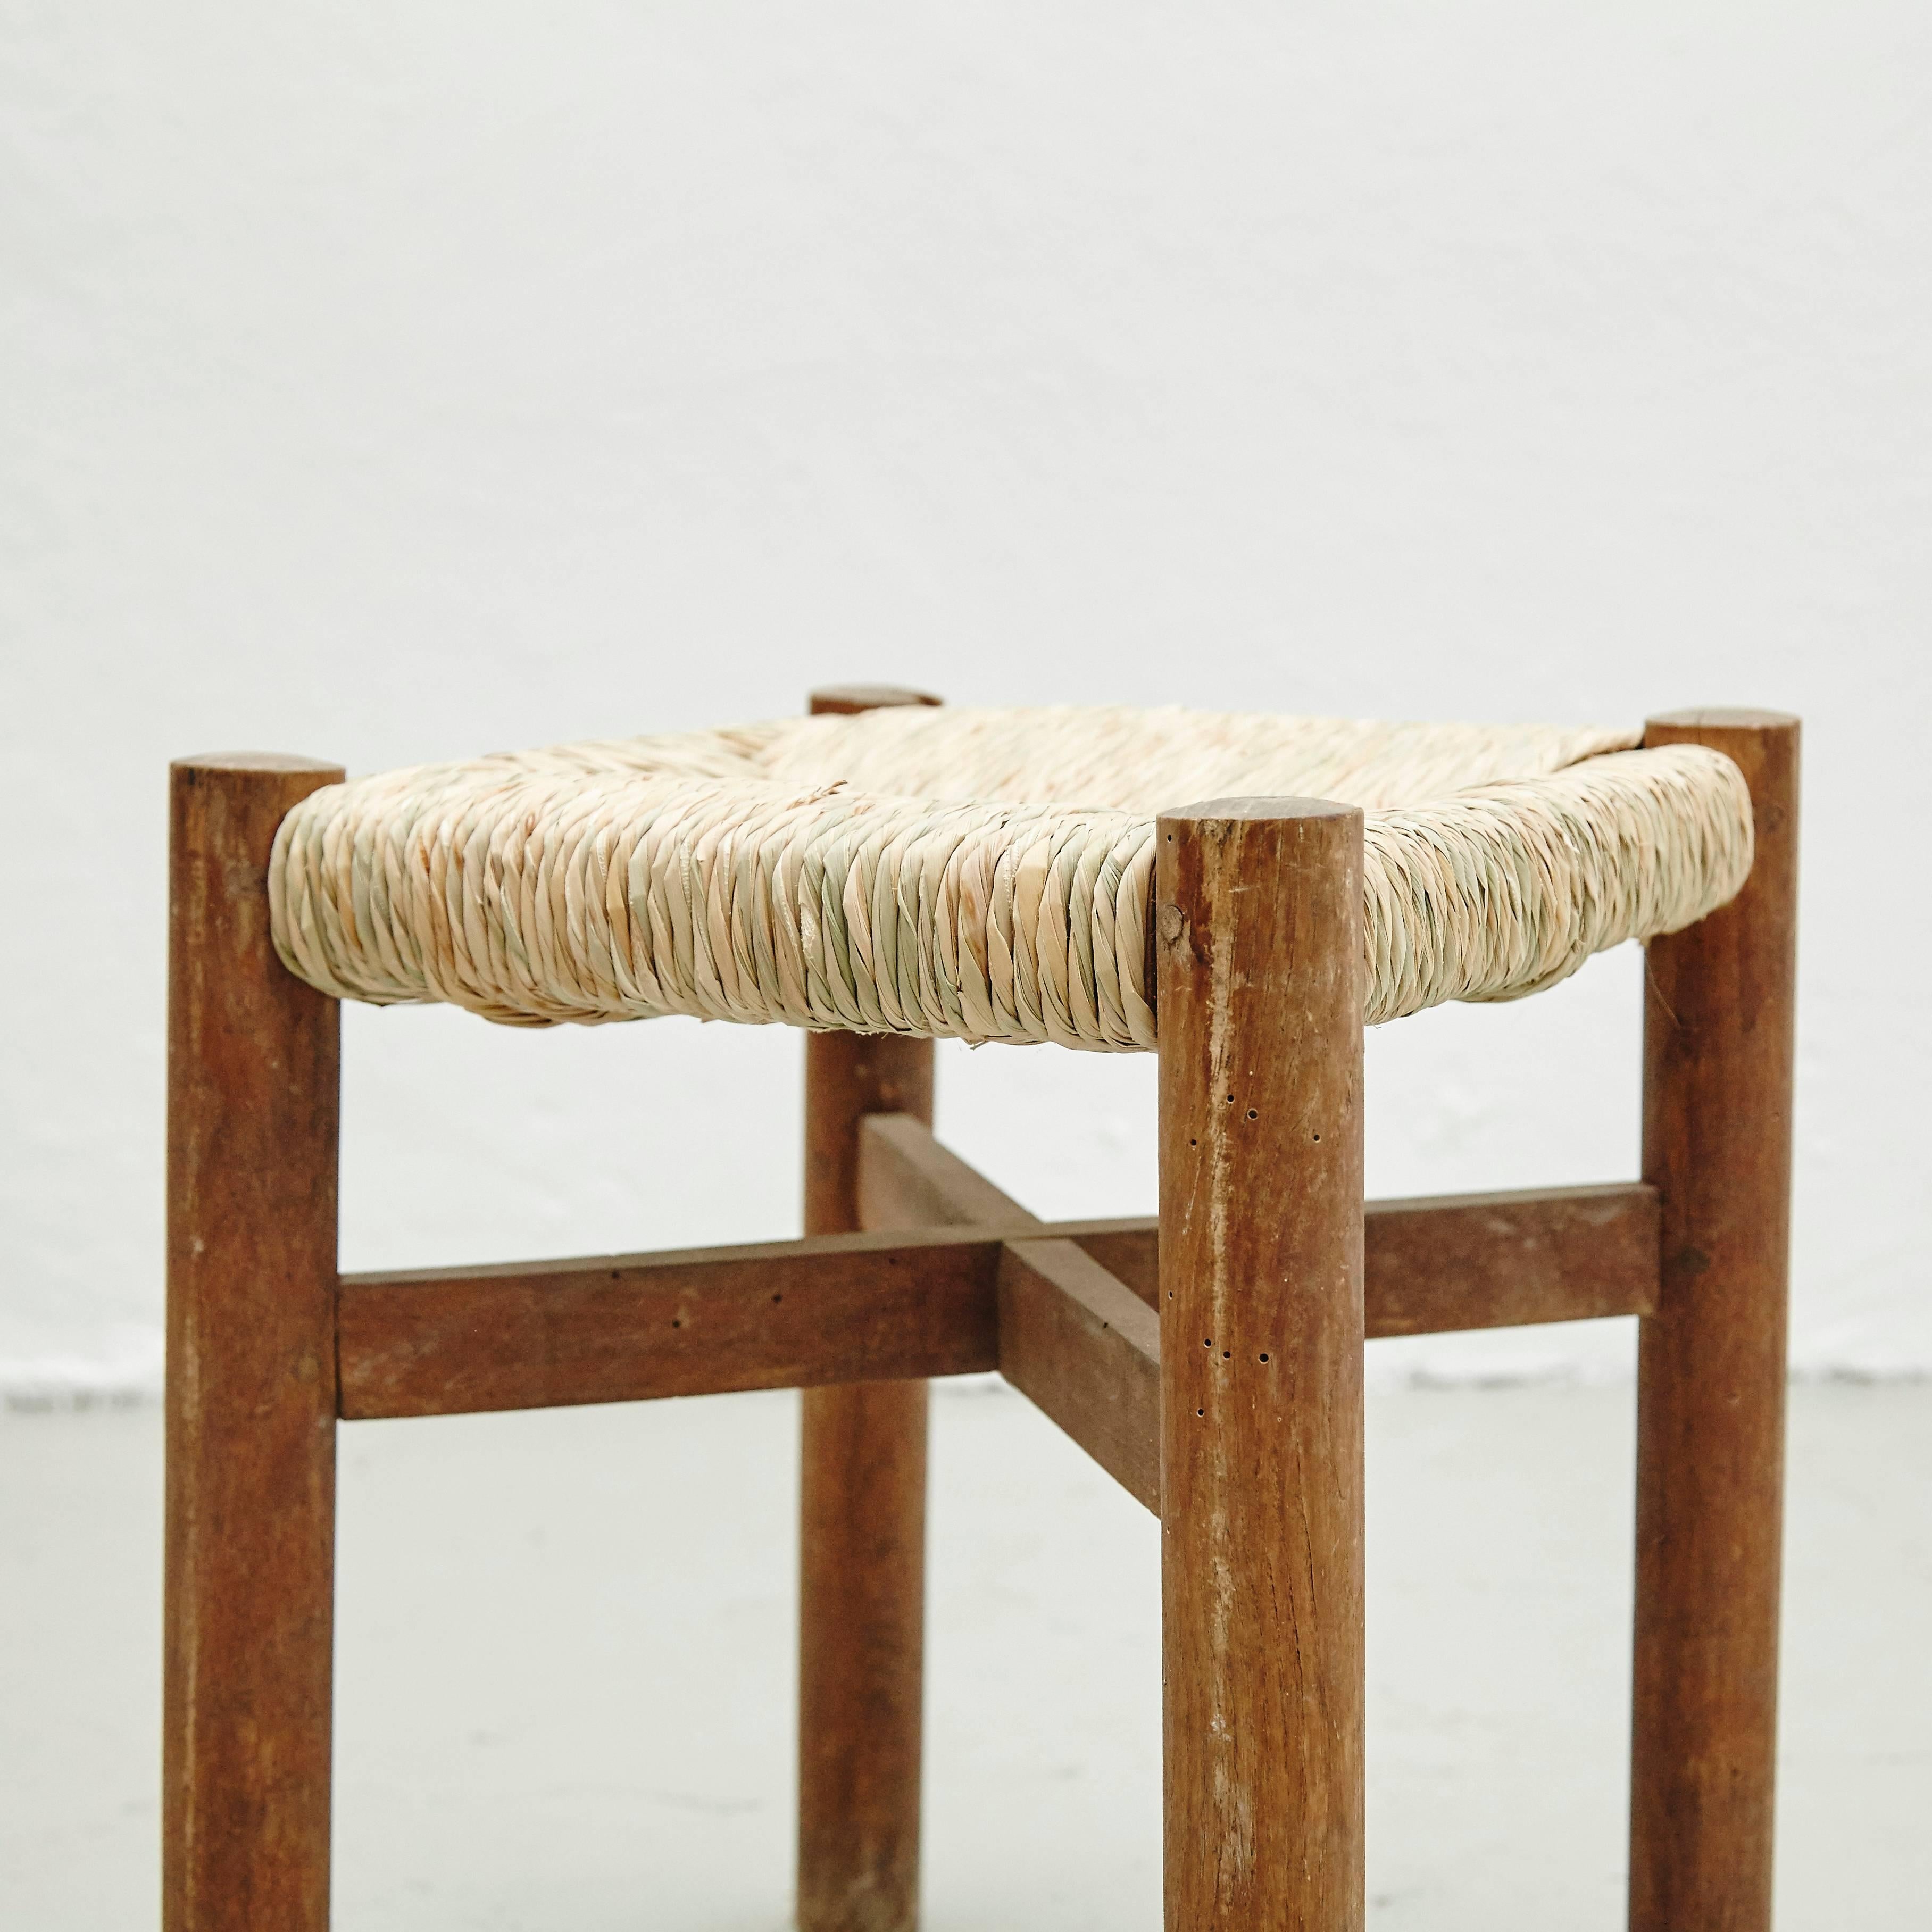 French Charlotte Perriand Wood and Rattan Stool for Meribel, circa 1950